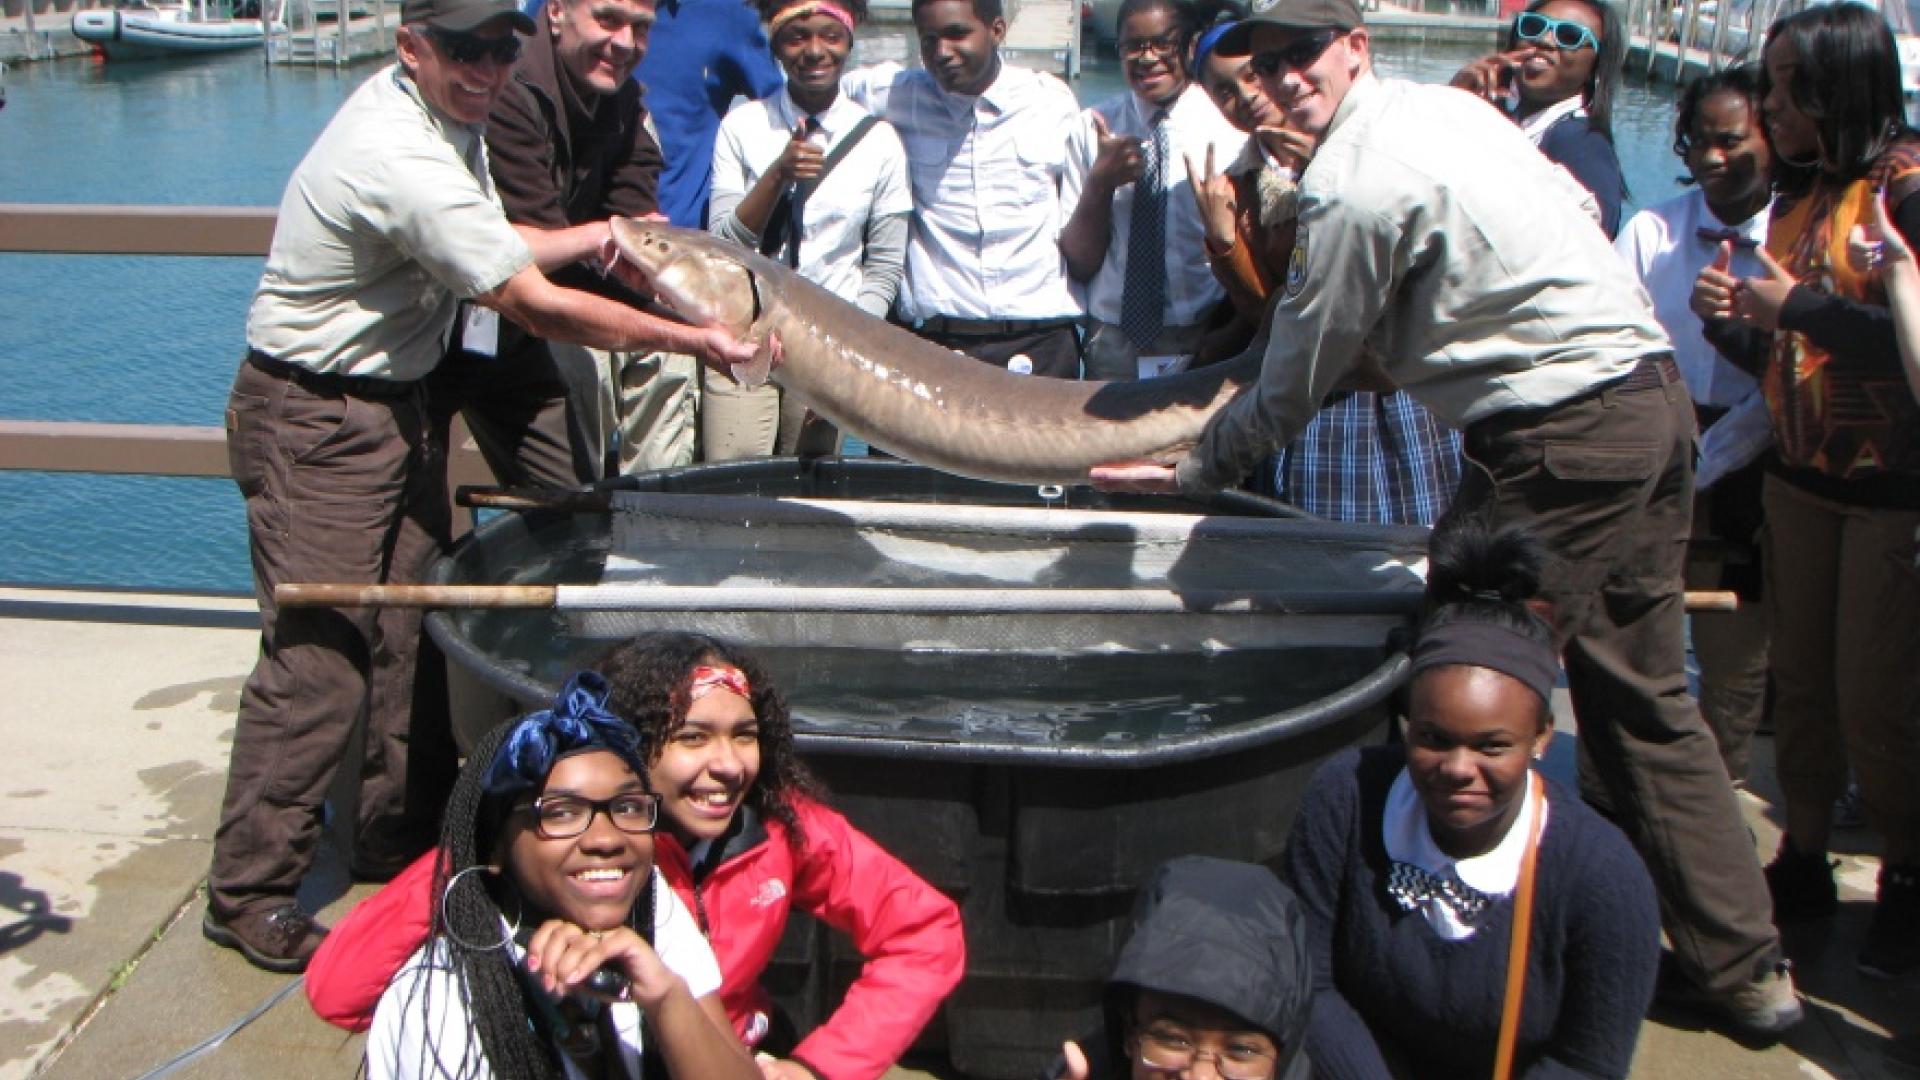 Water Matters - Detroit students participate in Sturgeon Day on the Detroit Riverwalk